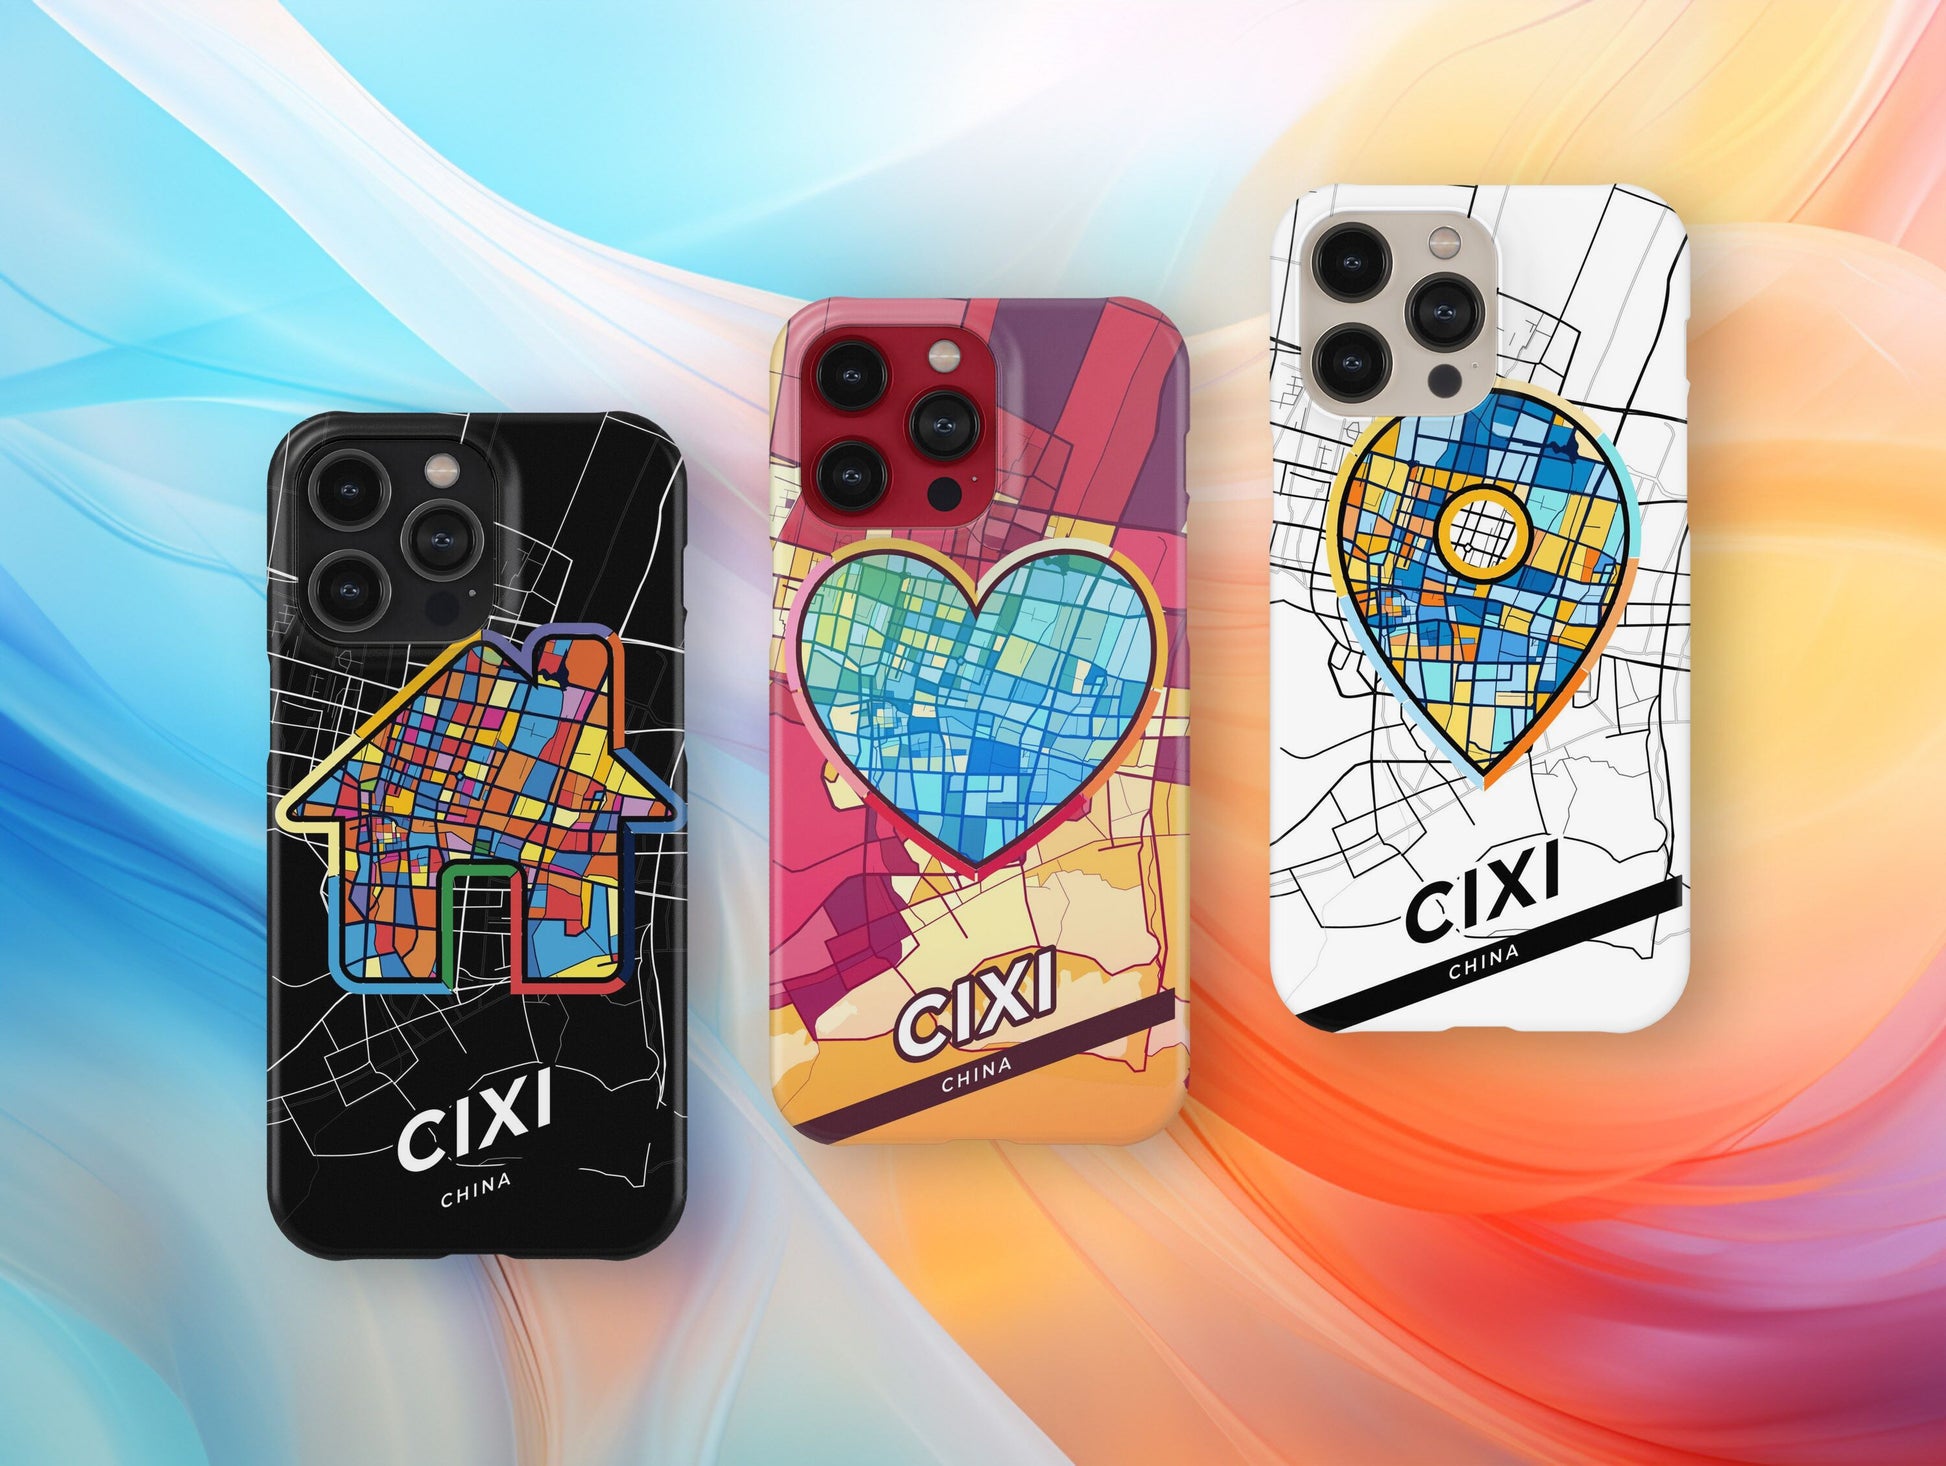 Cixi China slim phone case with colorful icon. Birthday, wedding or housewarming gift. Couple match cases.